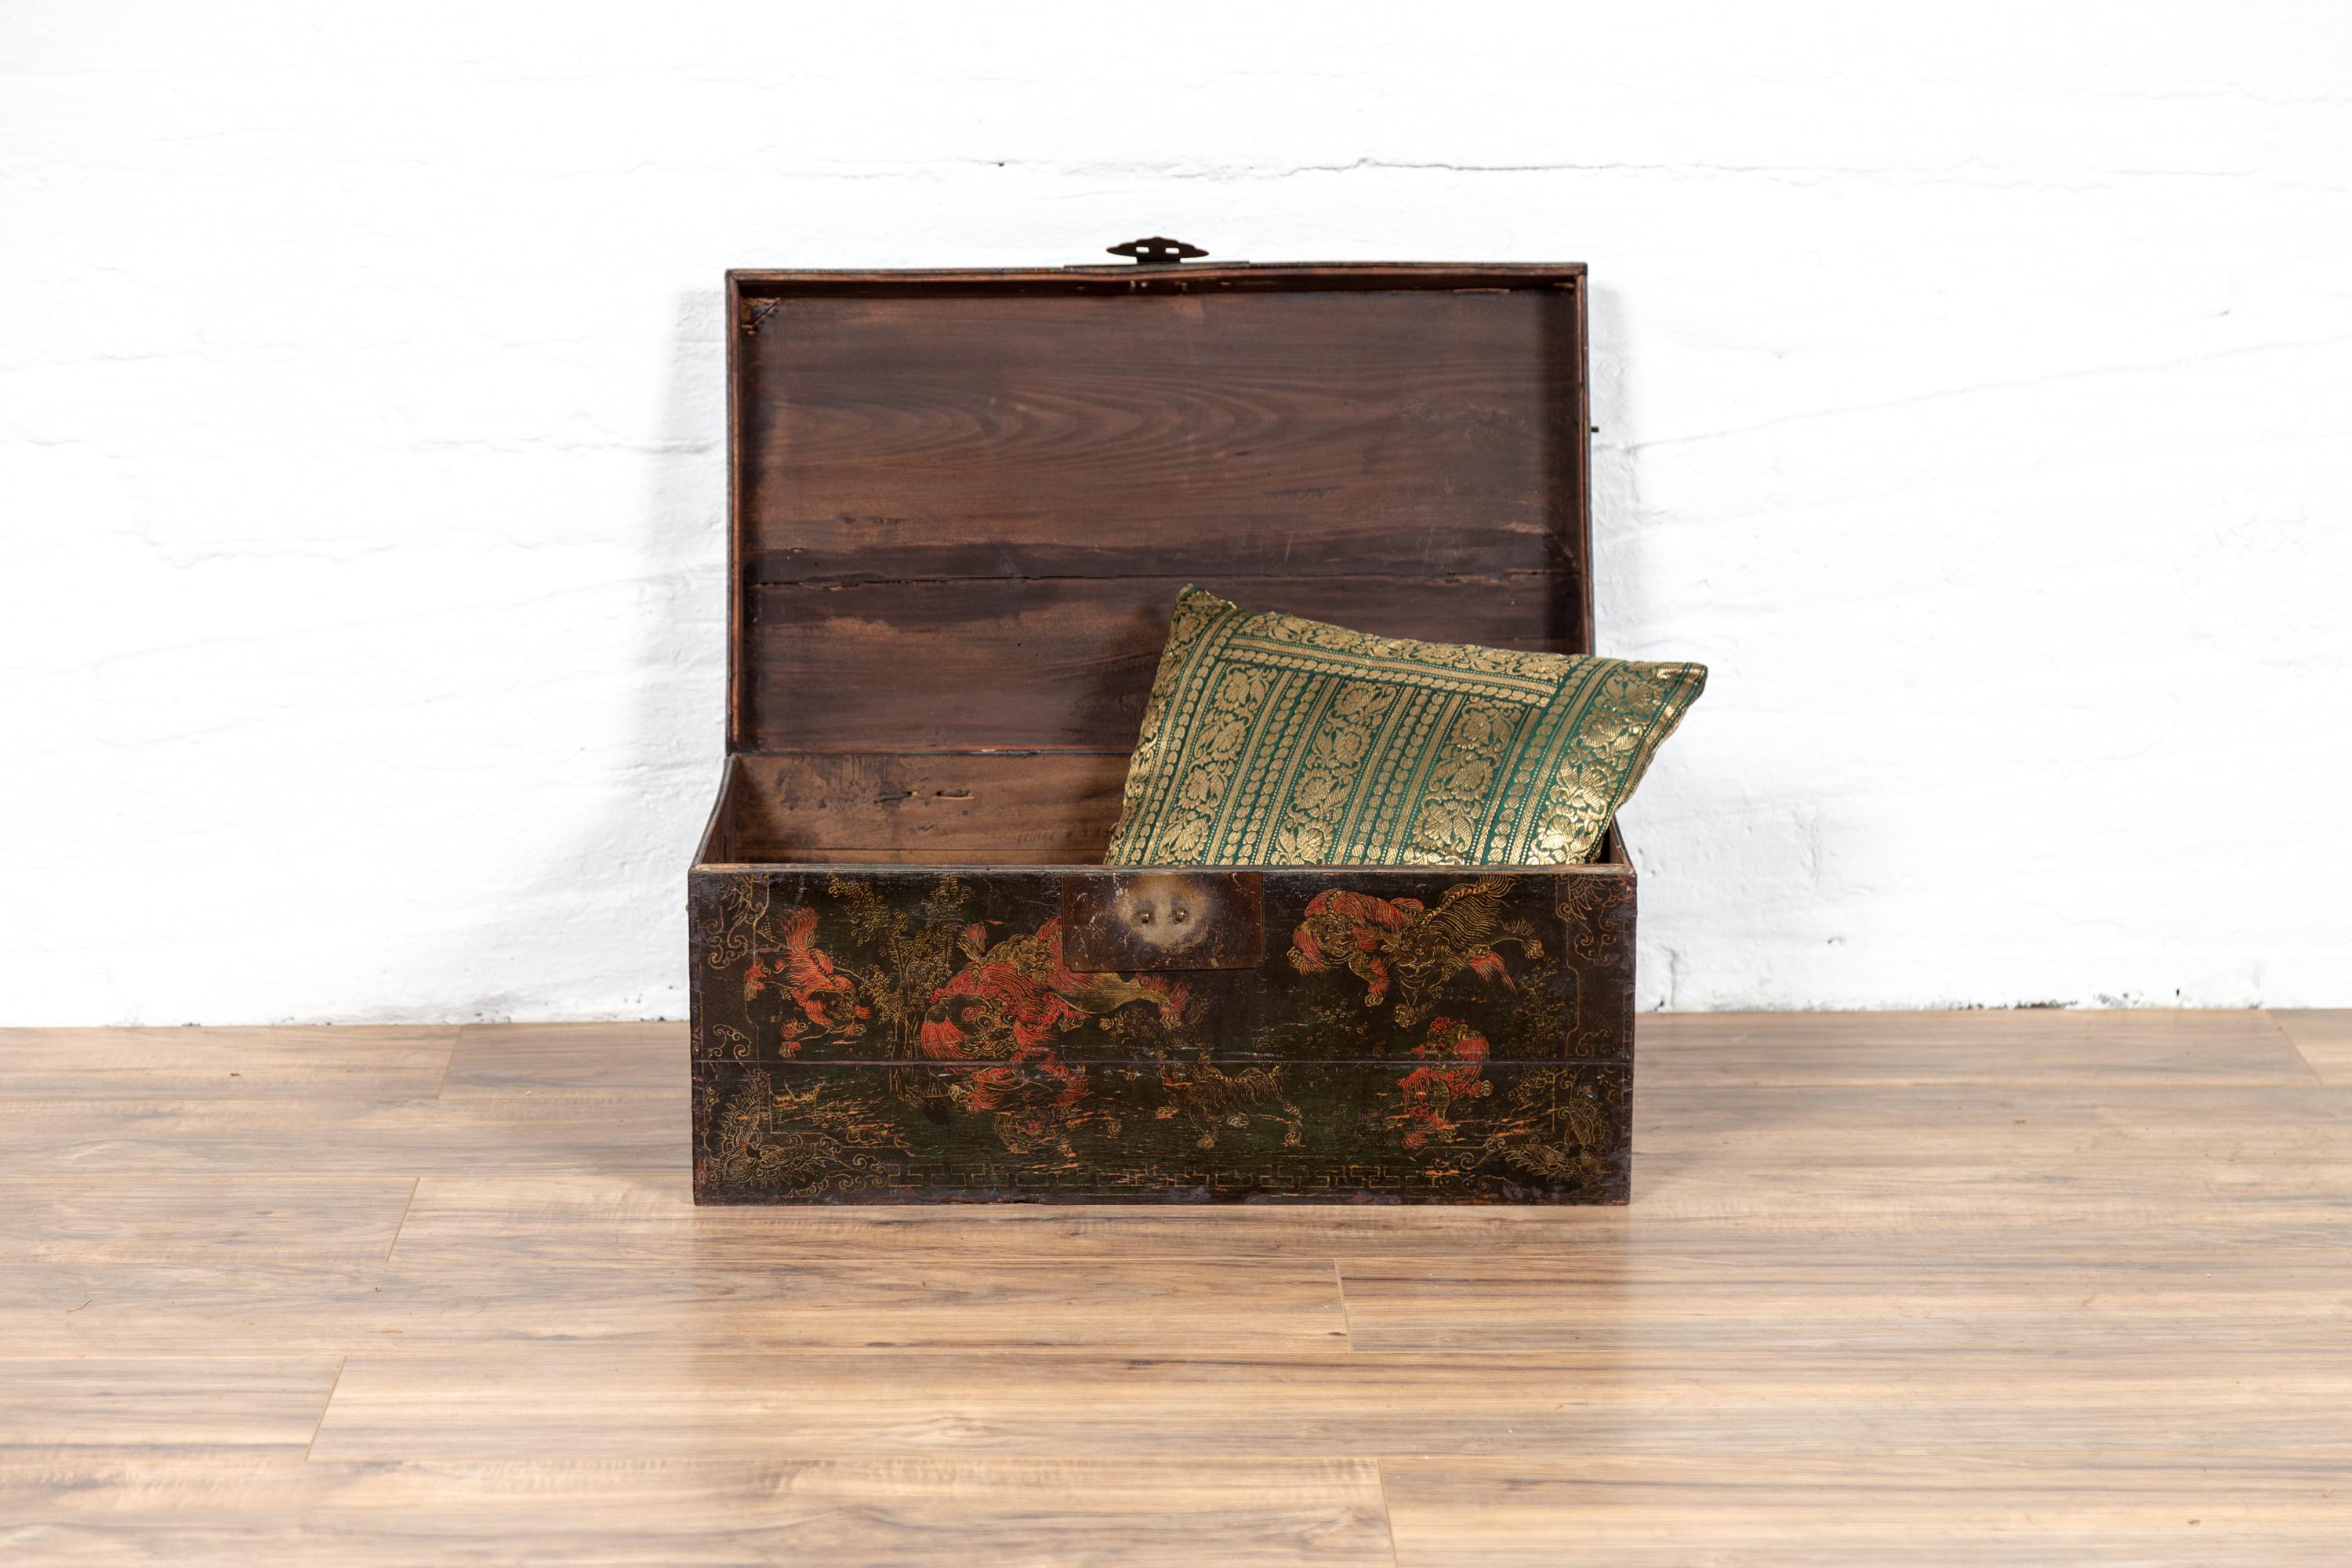 A Chinese antique black lacquer rectangular blanket chest from the 19th century, with underglaze décor and hand painted guardian lions. Born in China during the 19th century, this elegant wooden box features a linear Silhouette, perfectly decorated